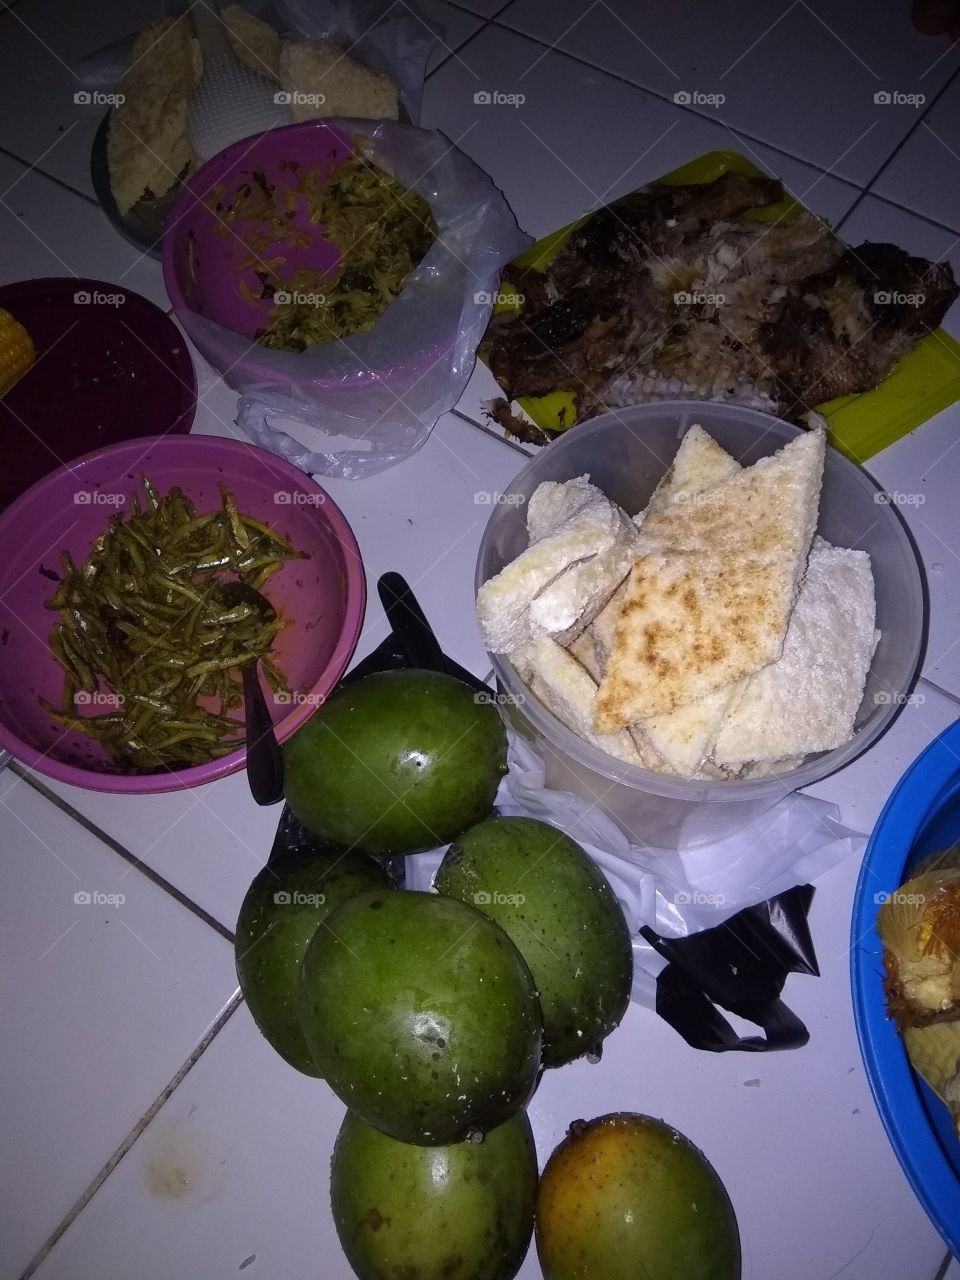 TRADITIONAL FOOD
Explor about traditional food of East Indonesia.